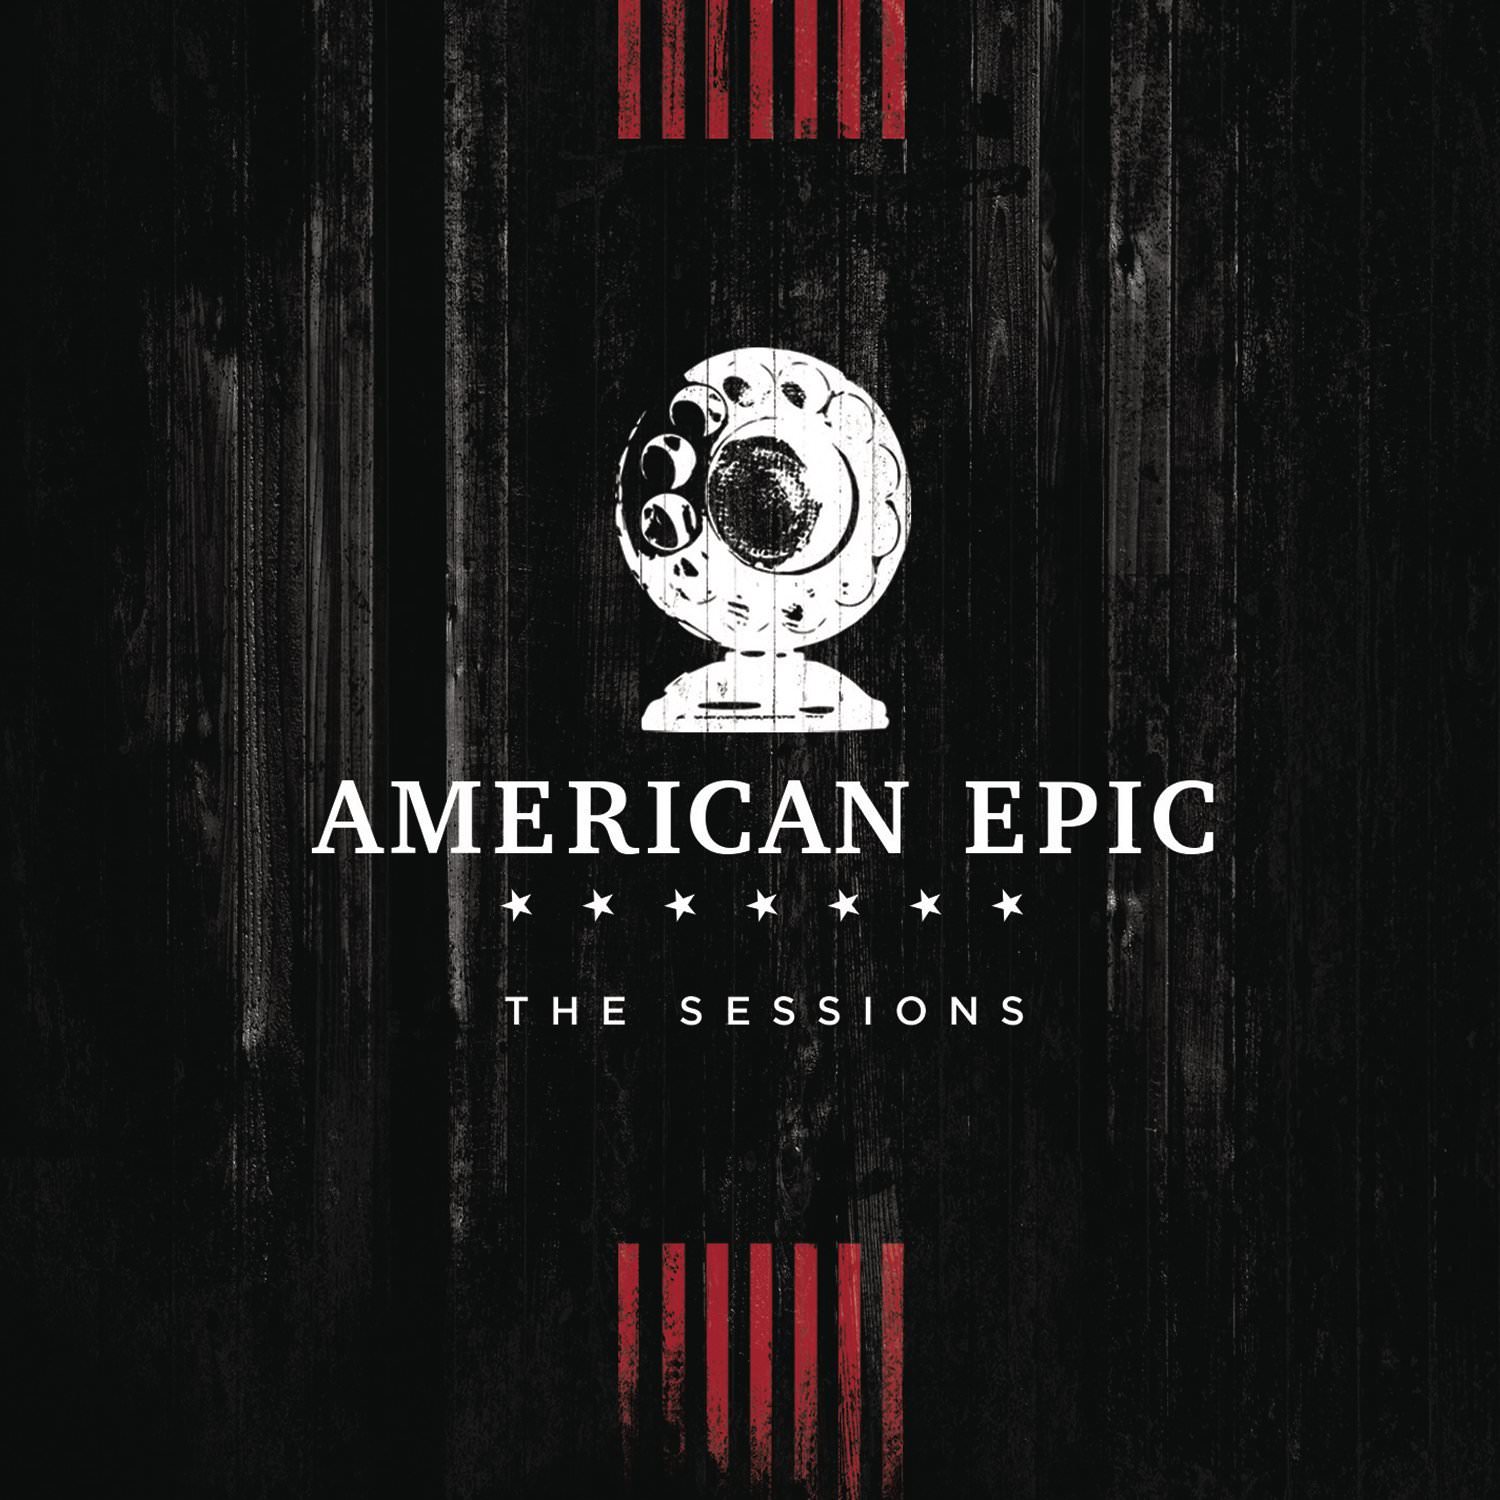 VA - Music from The American Epic: The Sessions {Deluxe Edition} (2017) [Qobuz FLAC 24bit/96kHz]